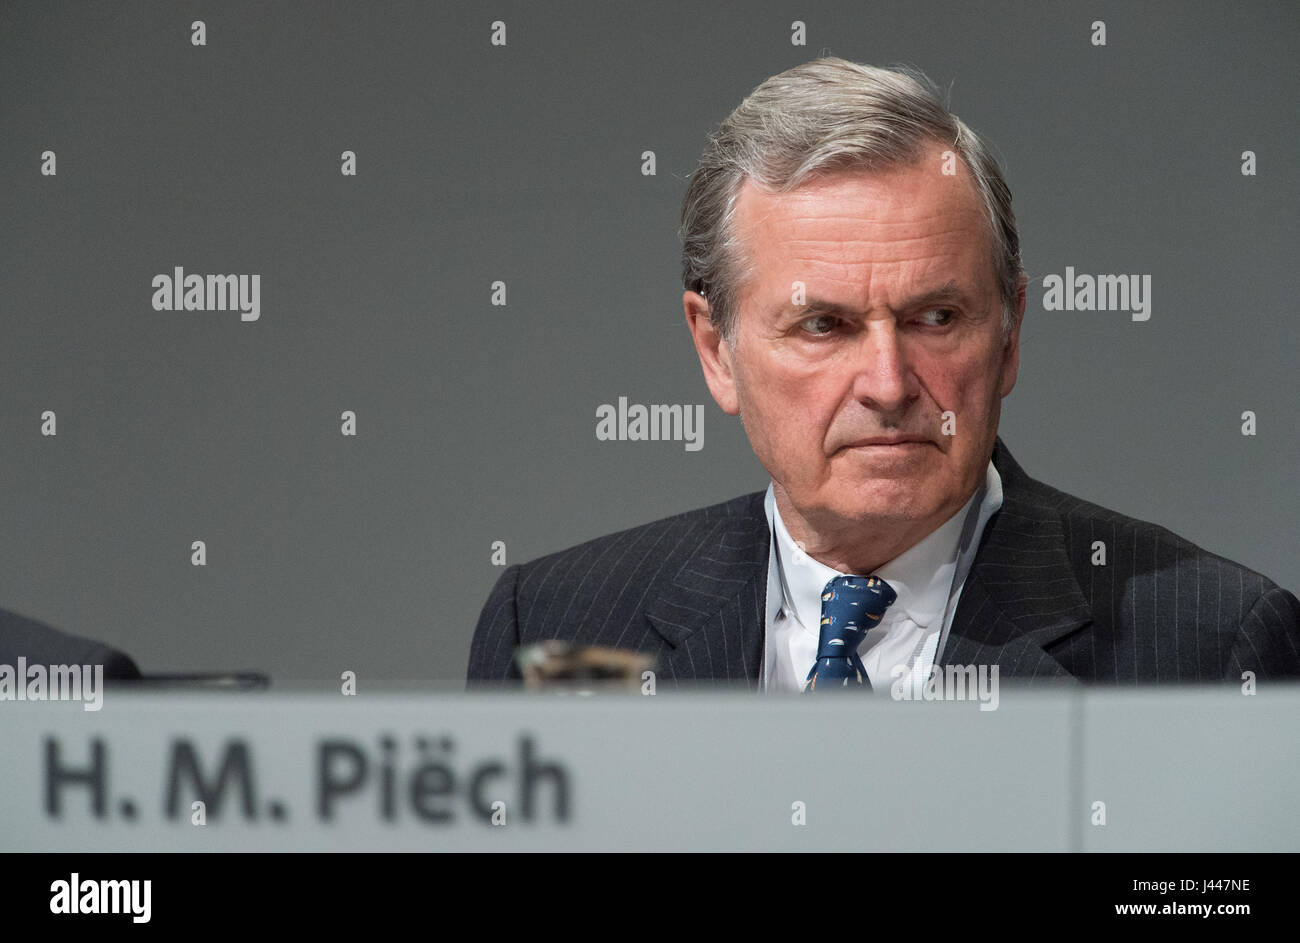 Hanover, Germany. 10th May, 2017. Hans Michel Piech, a member of the supervisory board at Volkswagen AG, at the German car manufacturer's general meeting in Hanover, Germany, 10 May 2017. The company is meeting for the second time since the beginning of the emissions scandal. The affair is set to dominate the agenda once again. Photo: Silas Stein/dpa/Alamy Live News Stock Photo